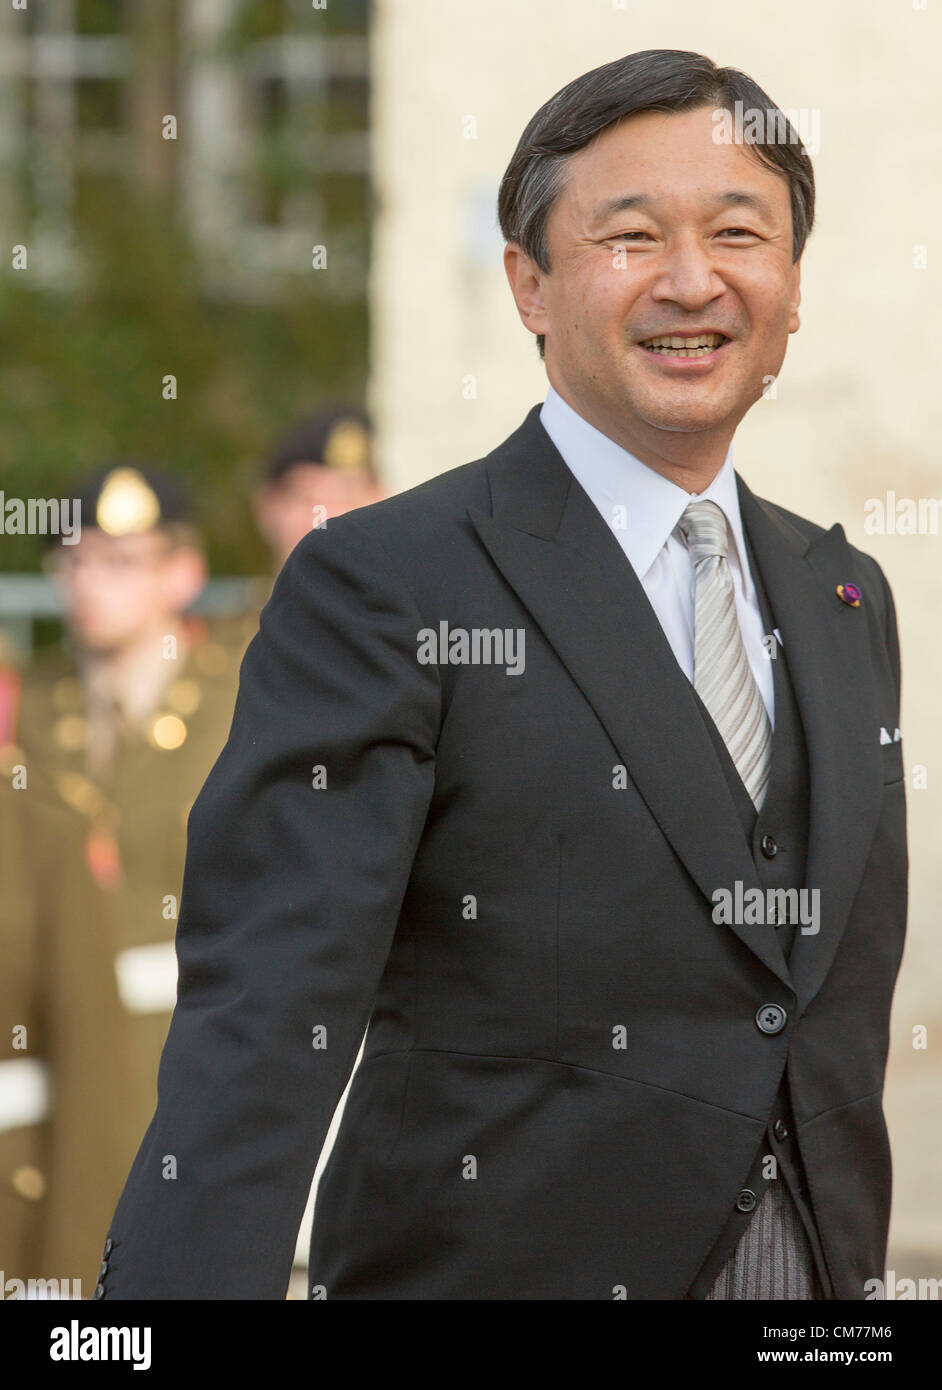 20/10/2012 - Luxembourg - Luxembourg City - Wedding of the Hereditary Grand Duke Guillaume and Countess Stéphanie de Lannoy at the Luxembourg Cathedral. Arrivals.Prince Naruhito. Stock Photo